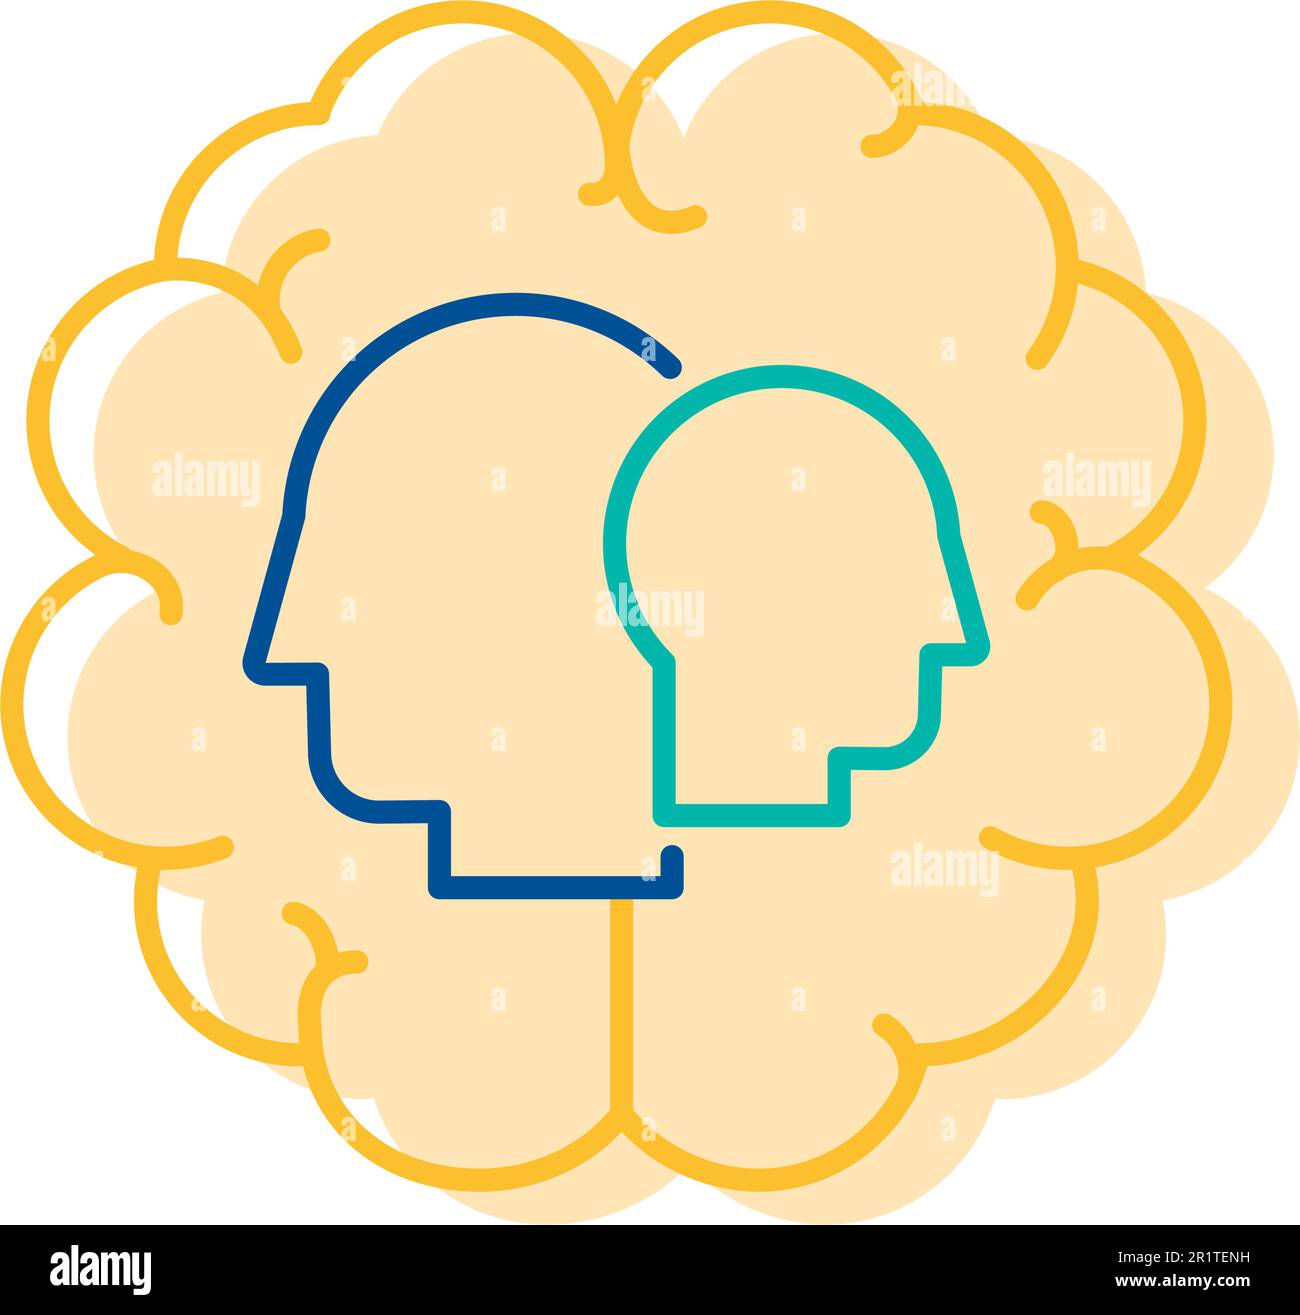 Psychology and Physiology Icon Human Brain Activity Concept. People Intelligence, Temperament and Health Sign with Head Silhouette on Brain Outline Ba Stock Vector